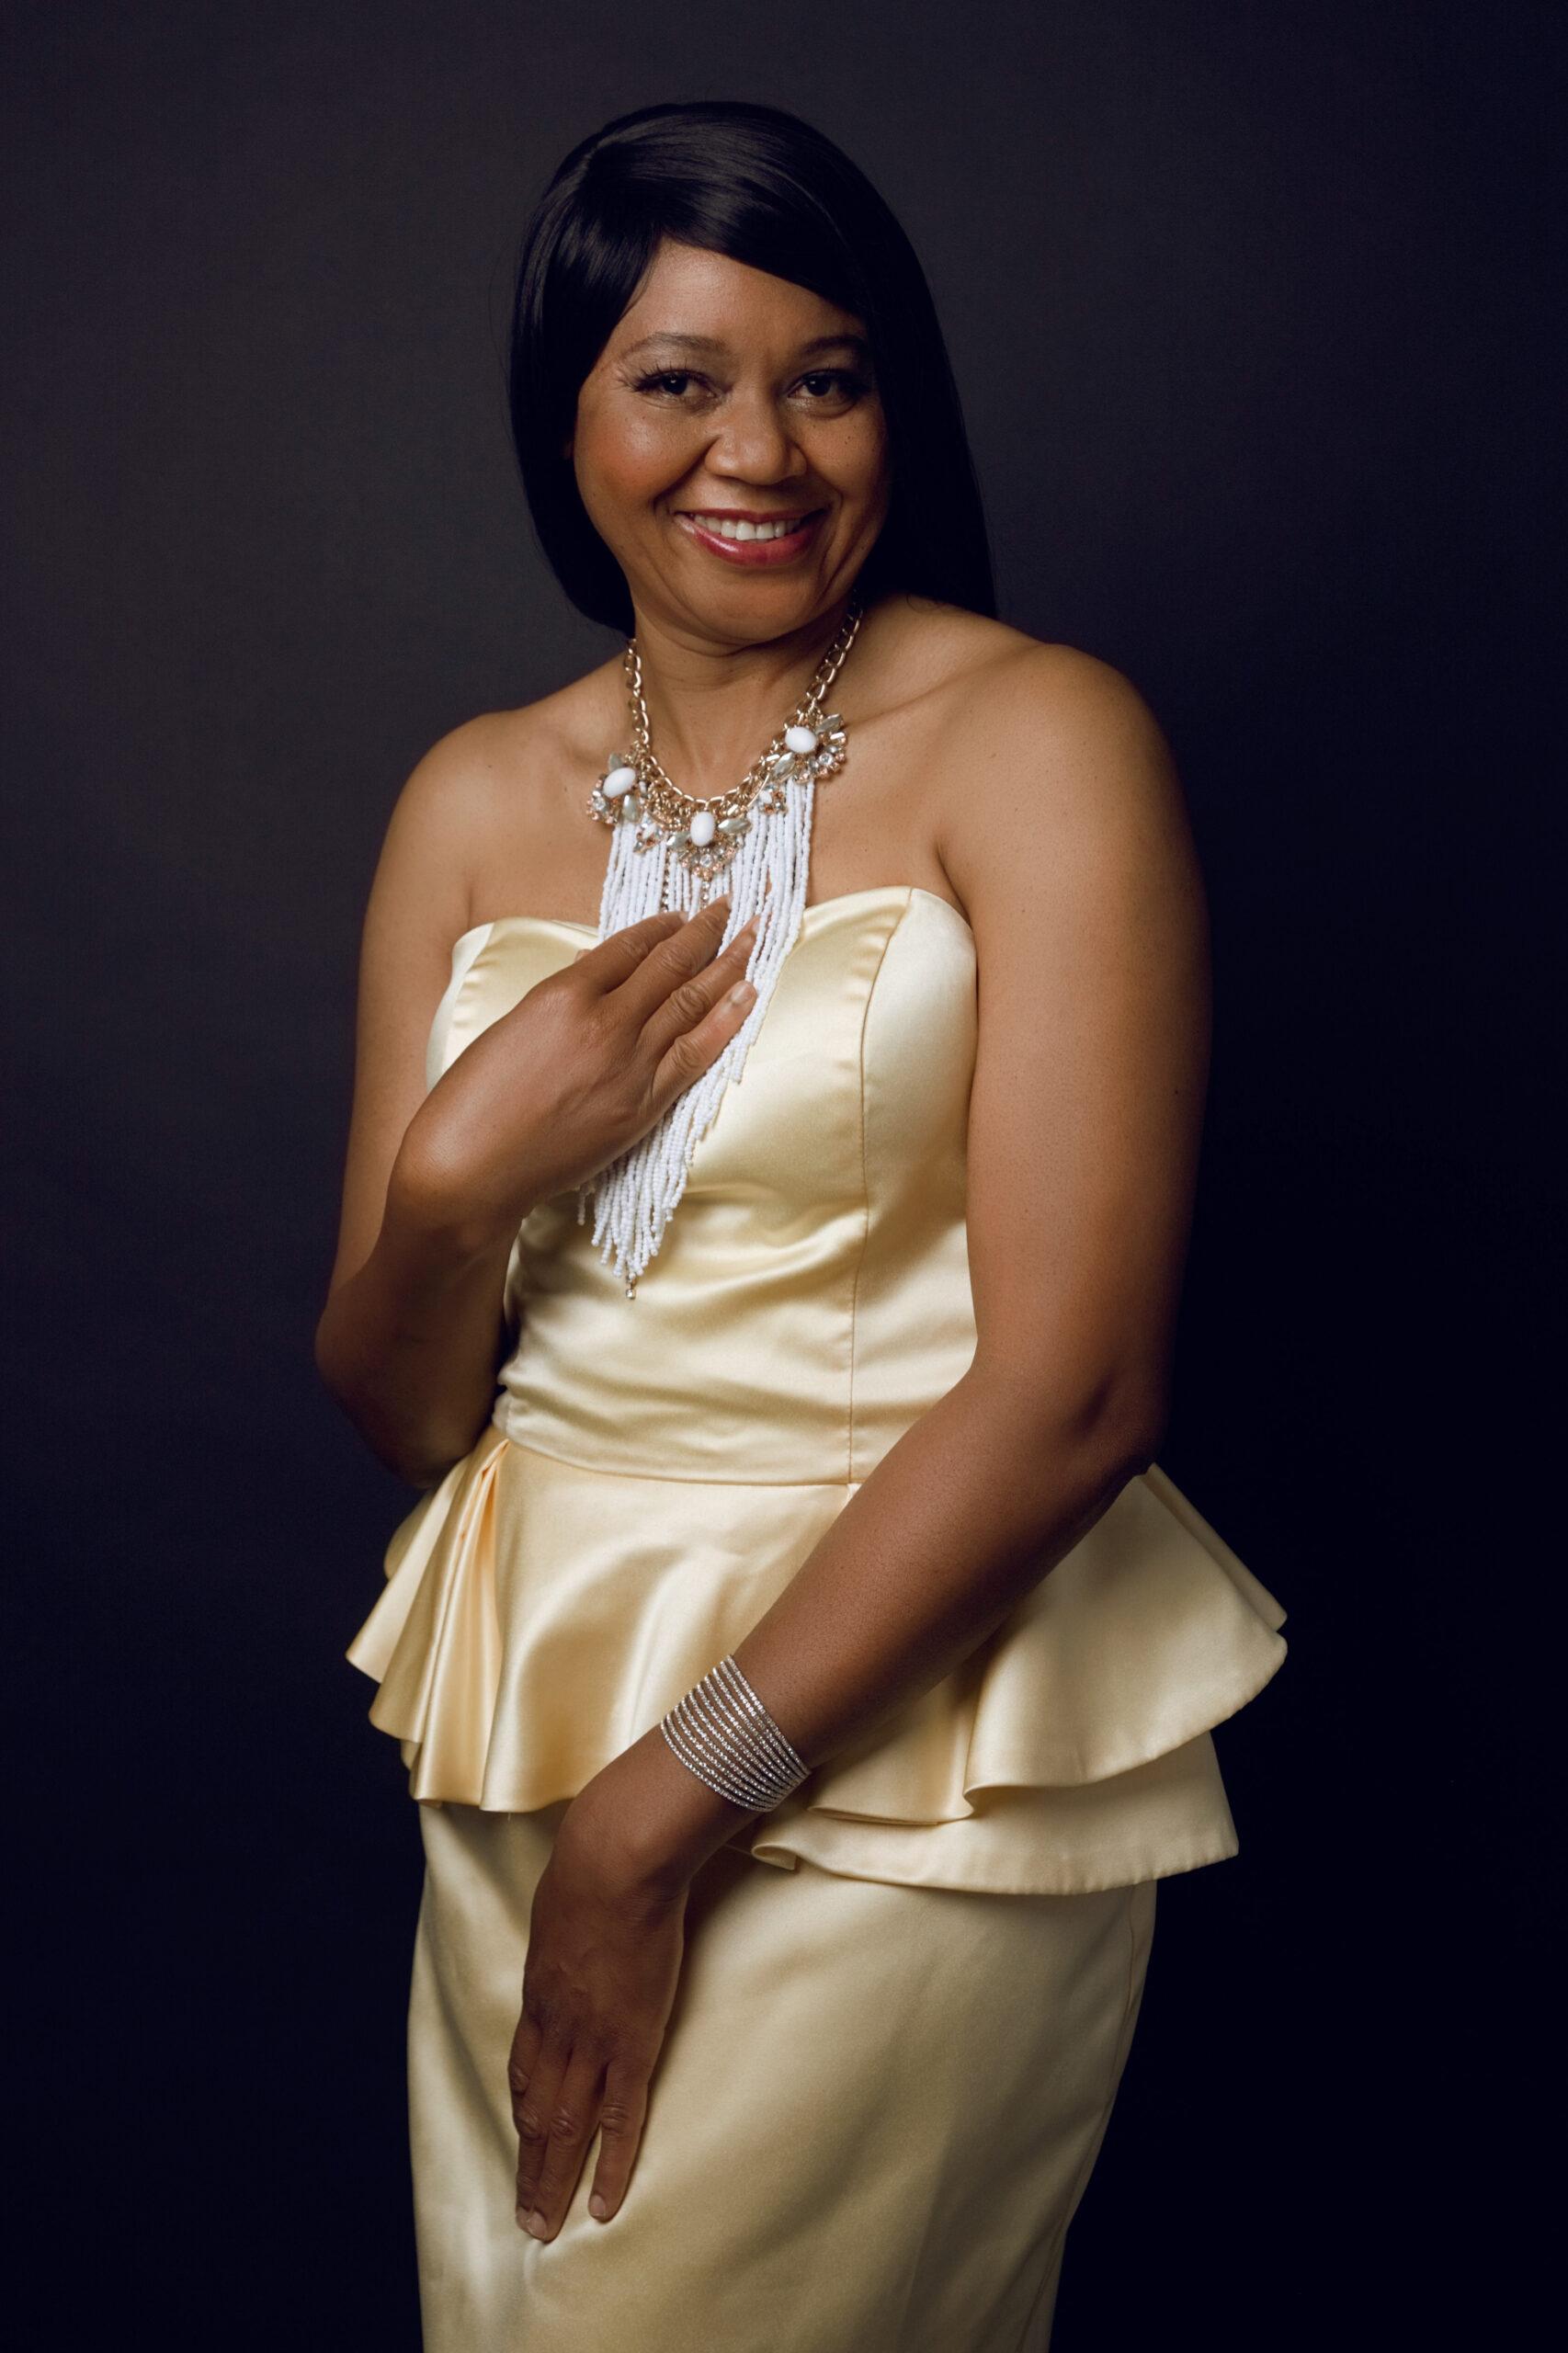 Black woman wearing a yellow satin dress and smiling